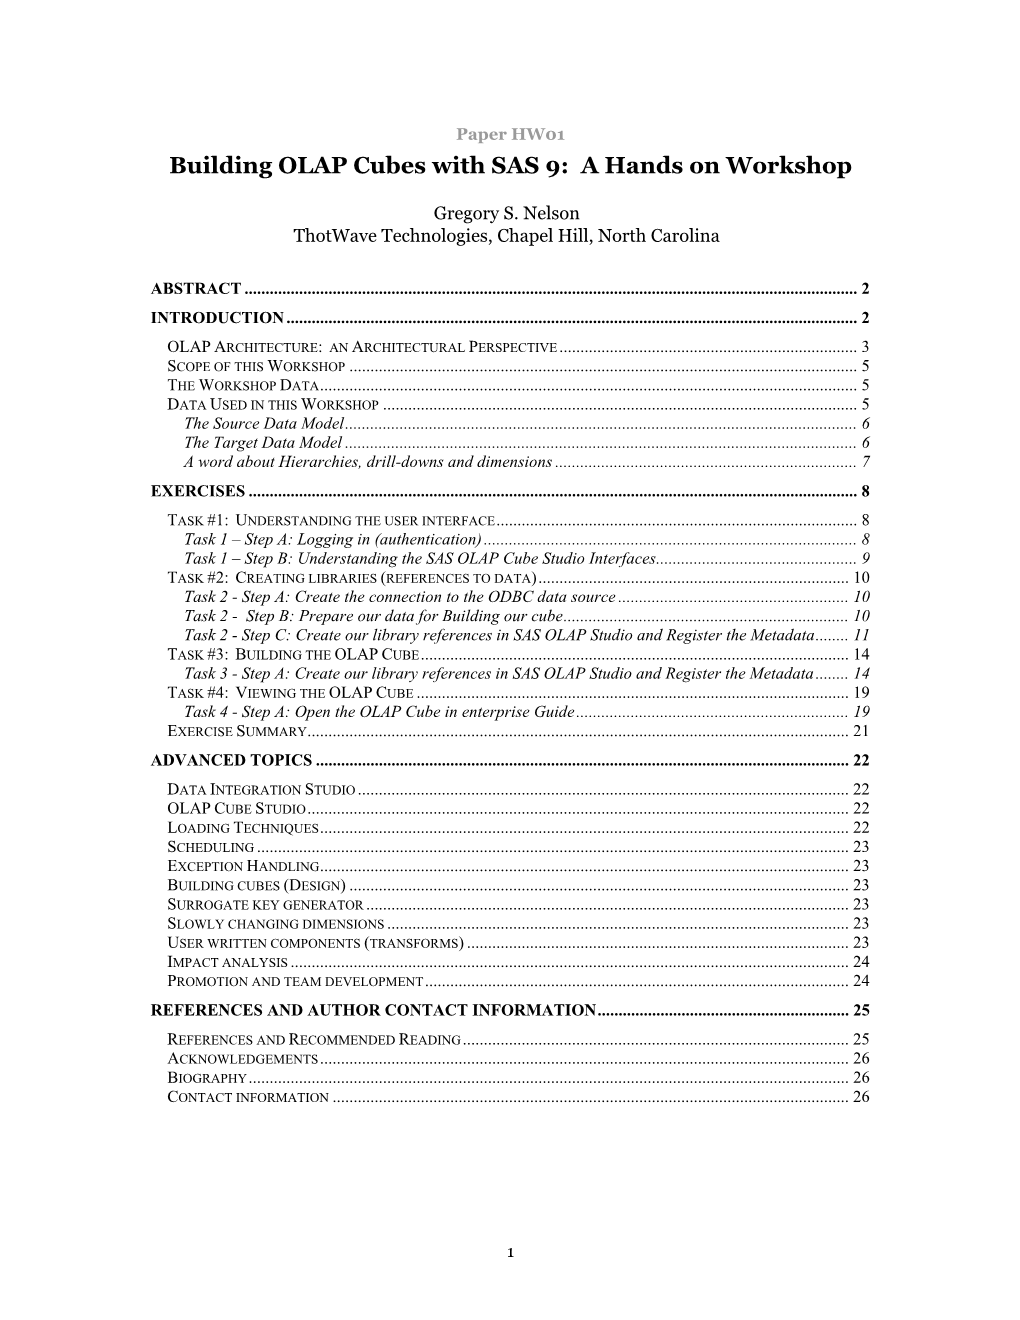 HW01 Building OLAP Cubes with SAS 9: a Hands on Workshop